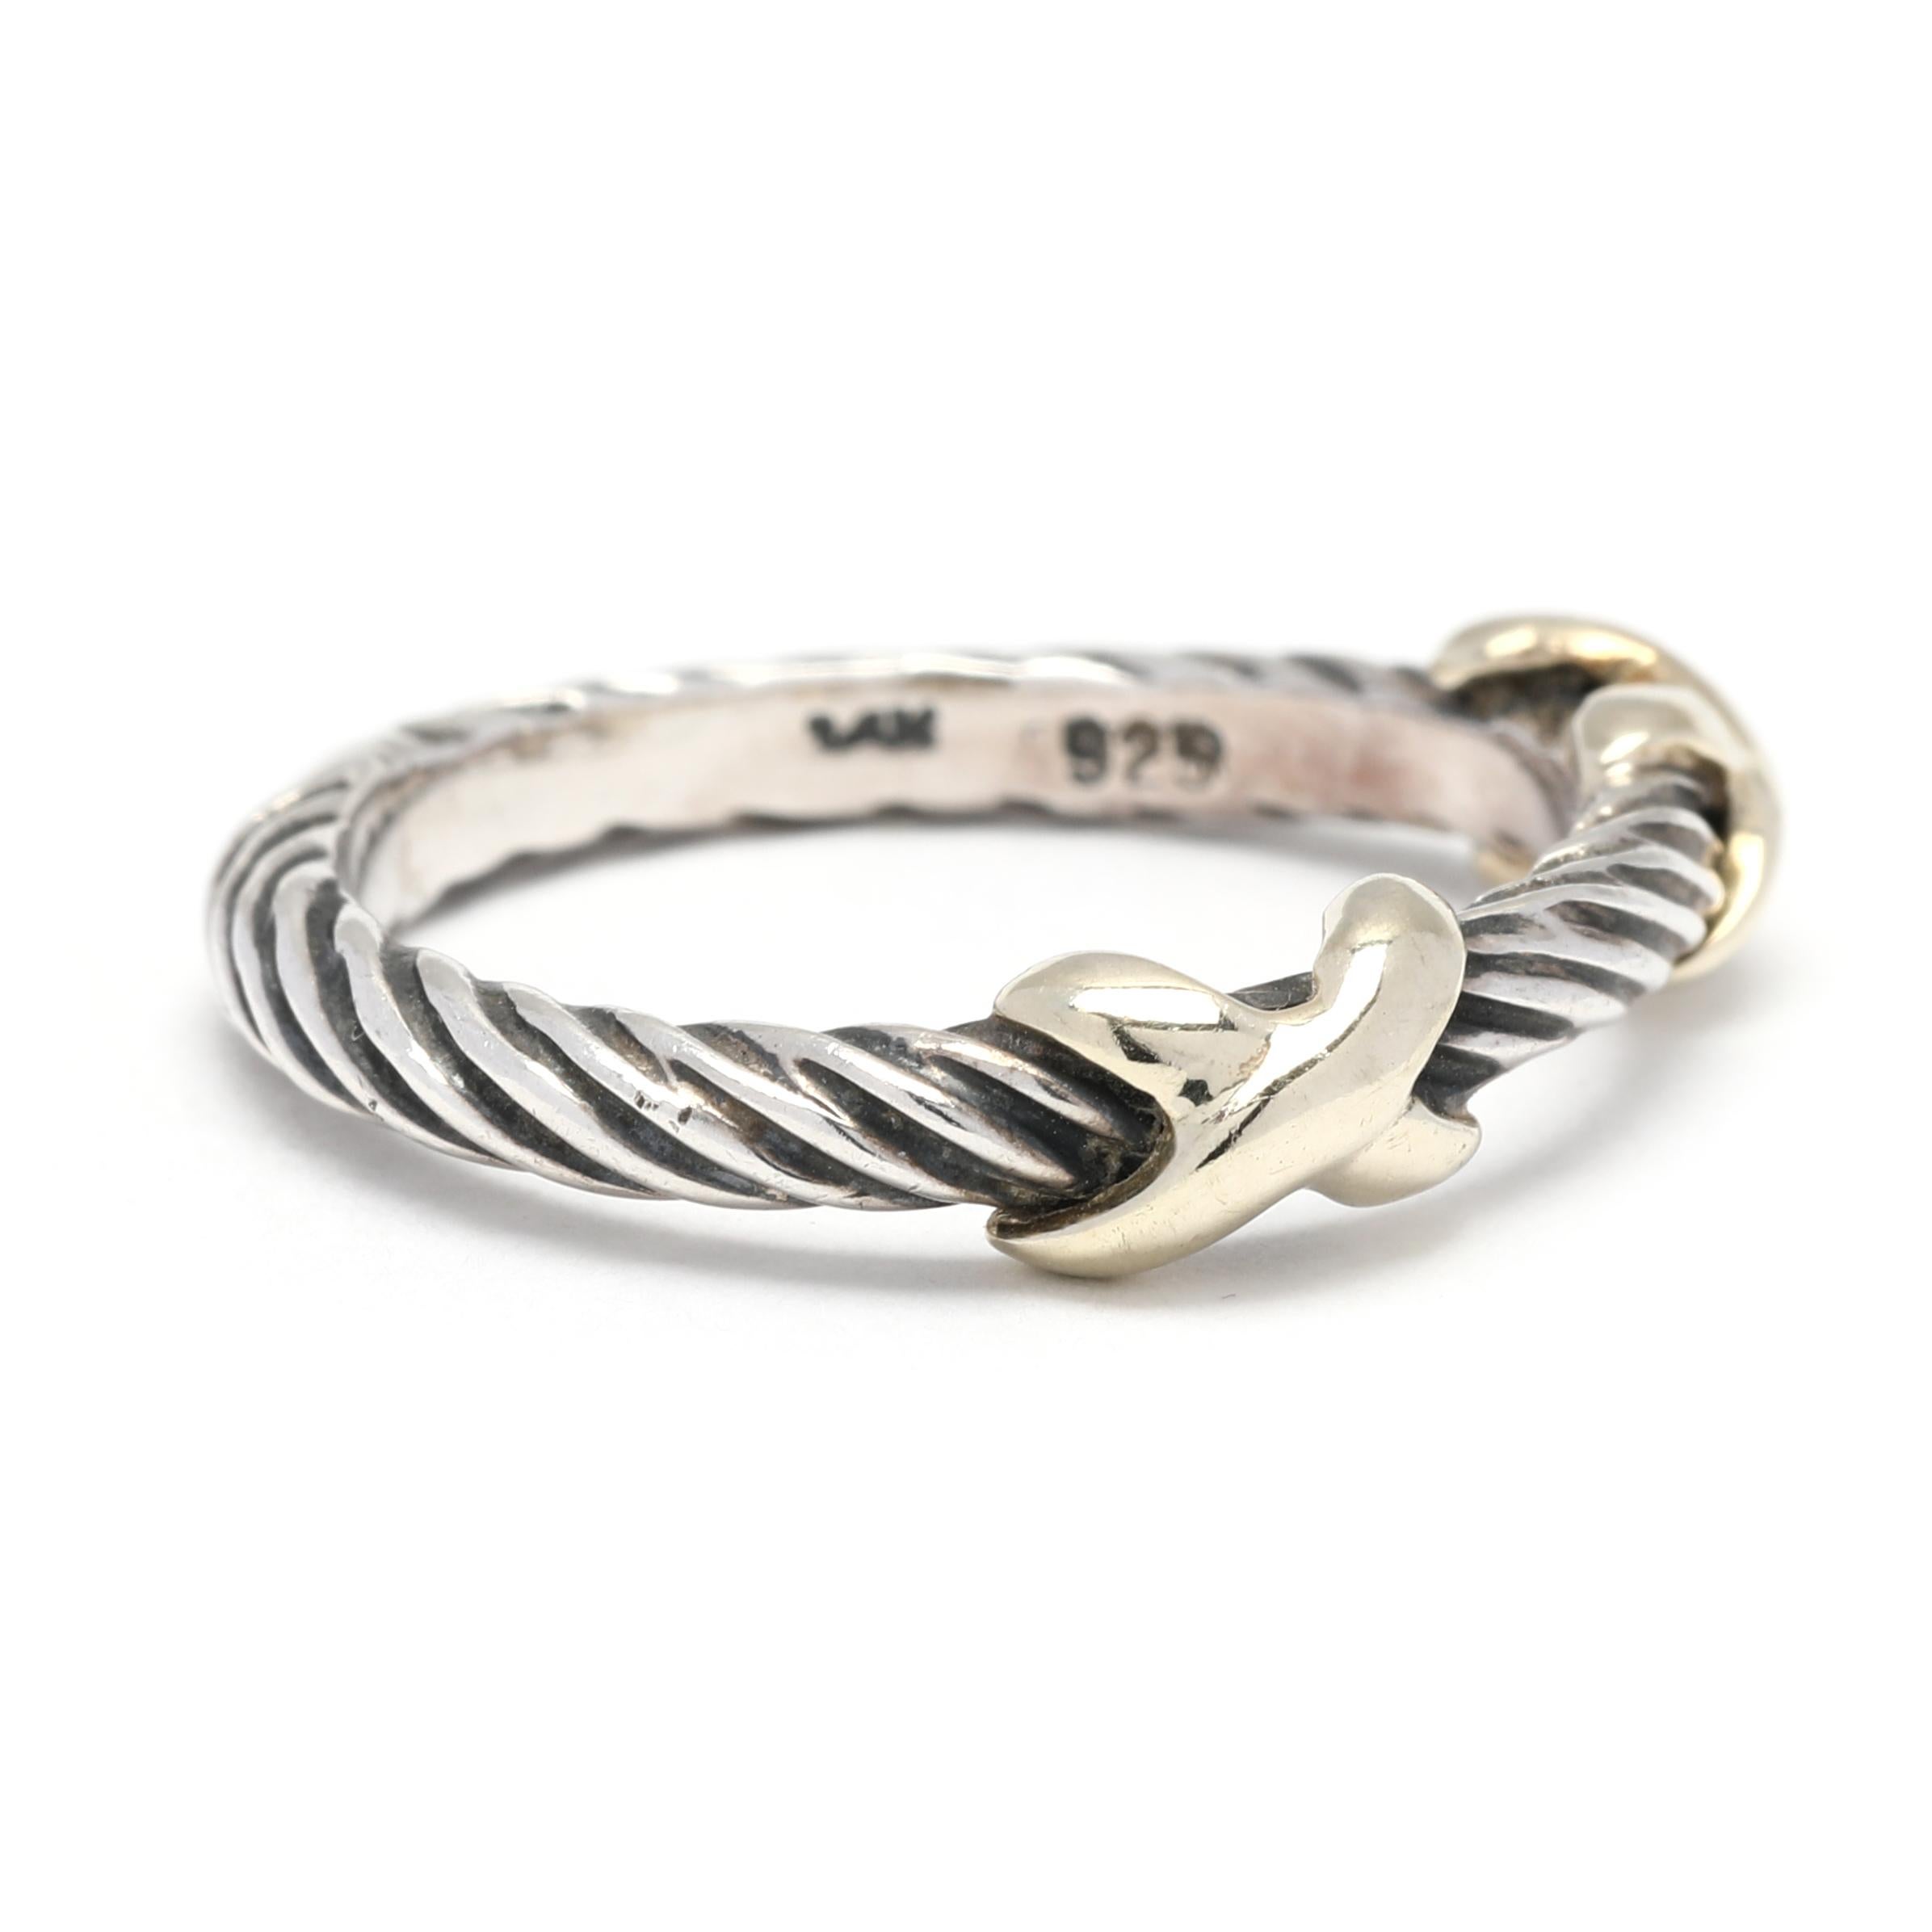 This David Yurman X-design stackable band ring is an exquisite piece of luxury jewelry, handmade with 14K yellow gold and sterling silver. Crafted with a delicate thin cable design, the double X makes a stunning stand-alone or stackable style that